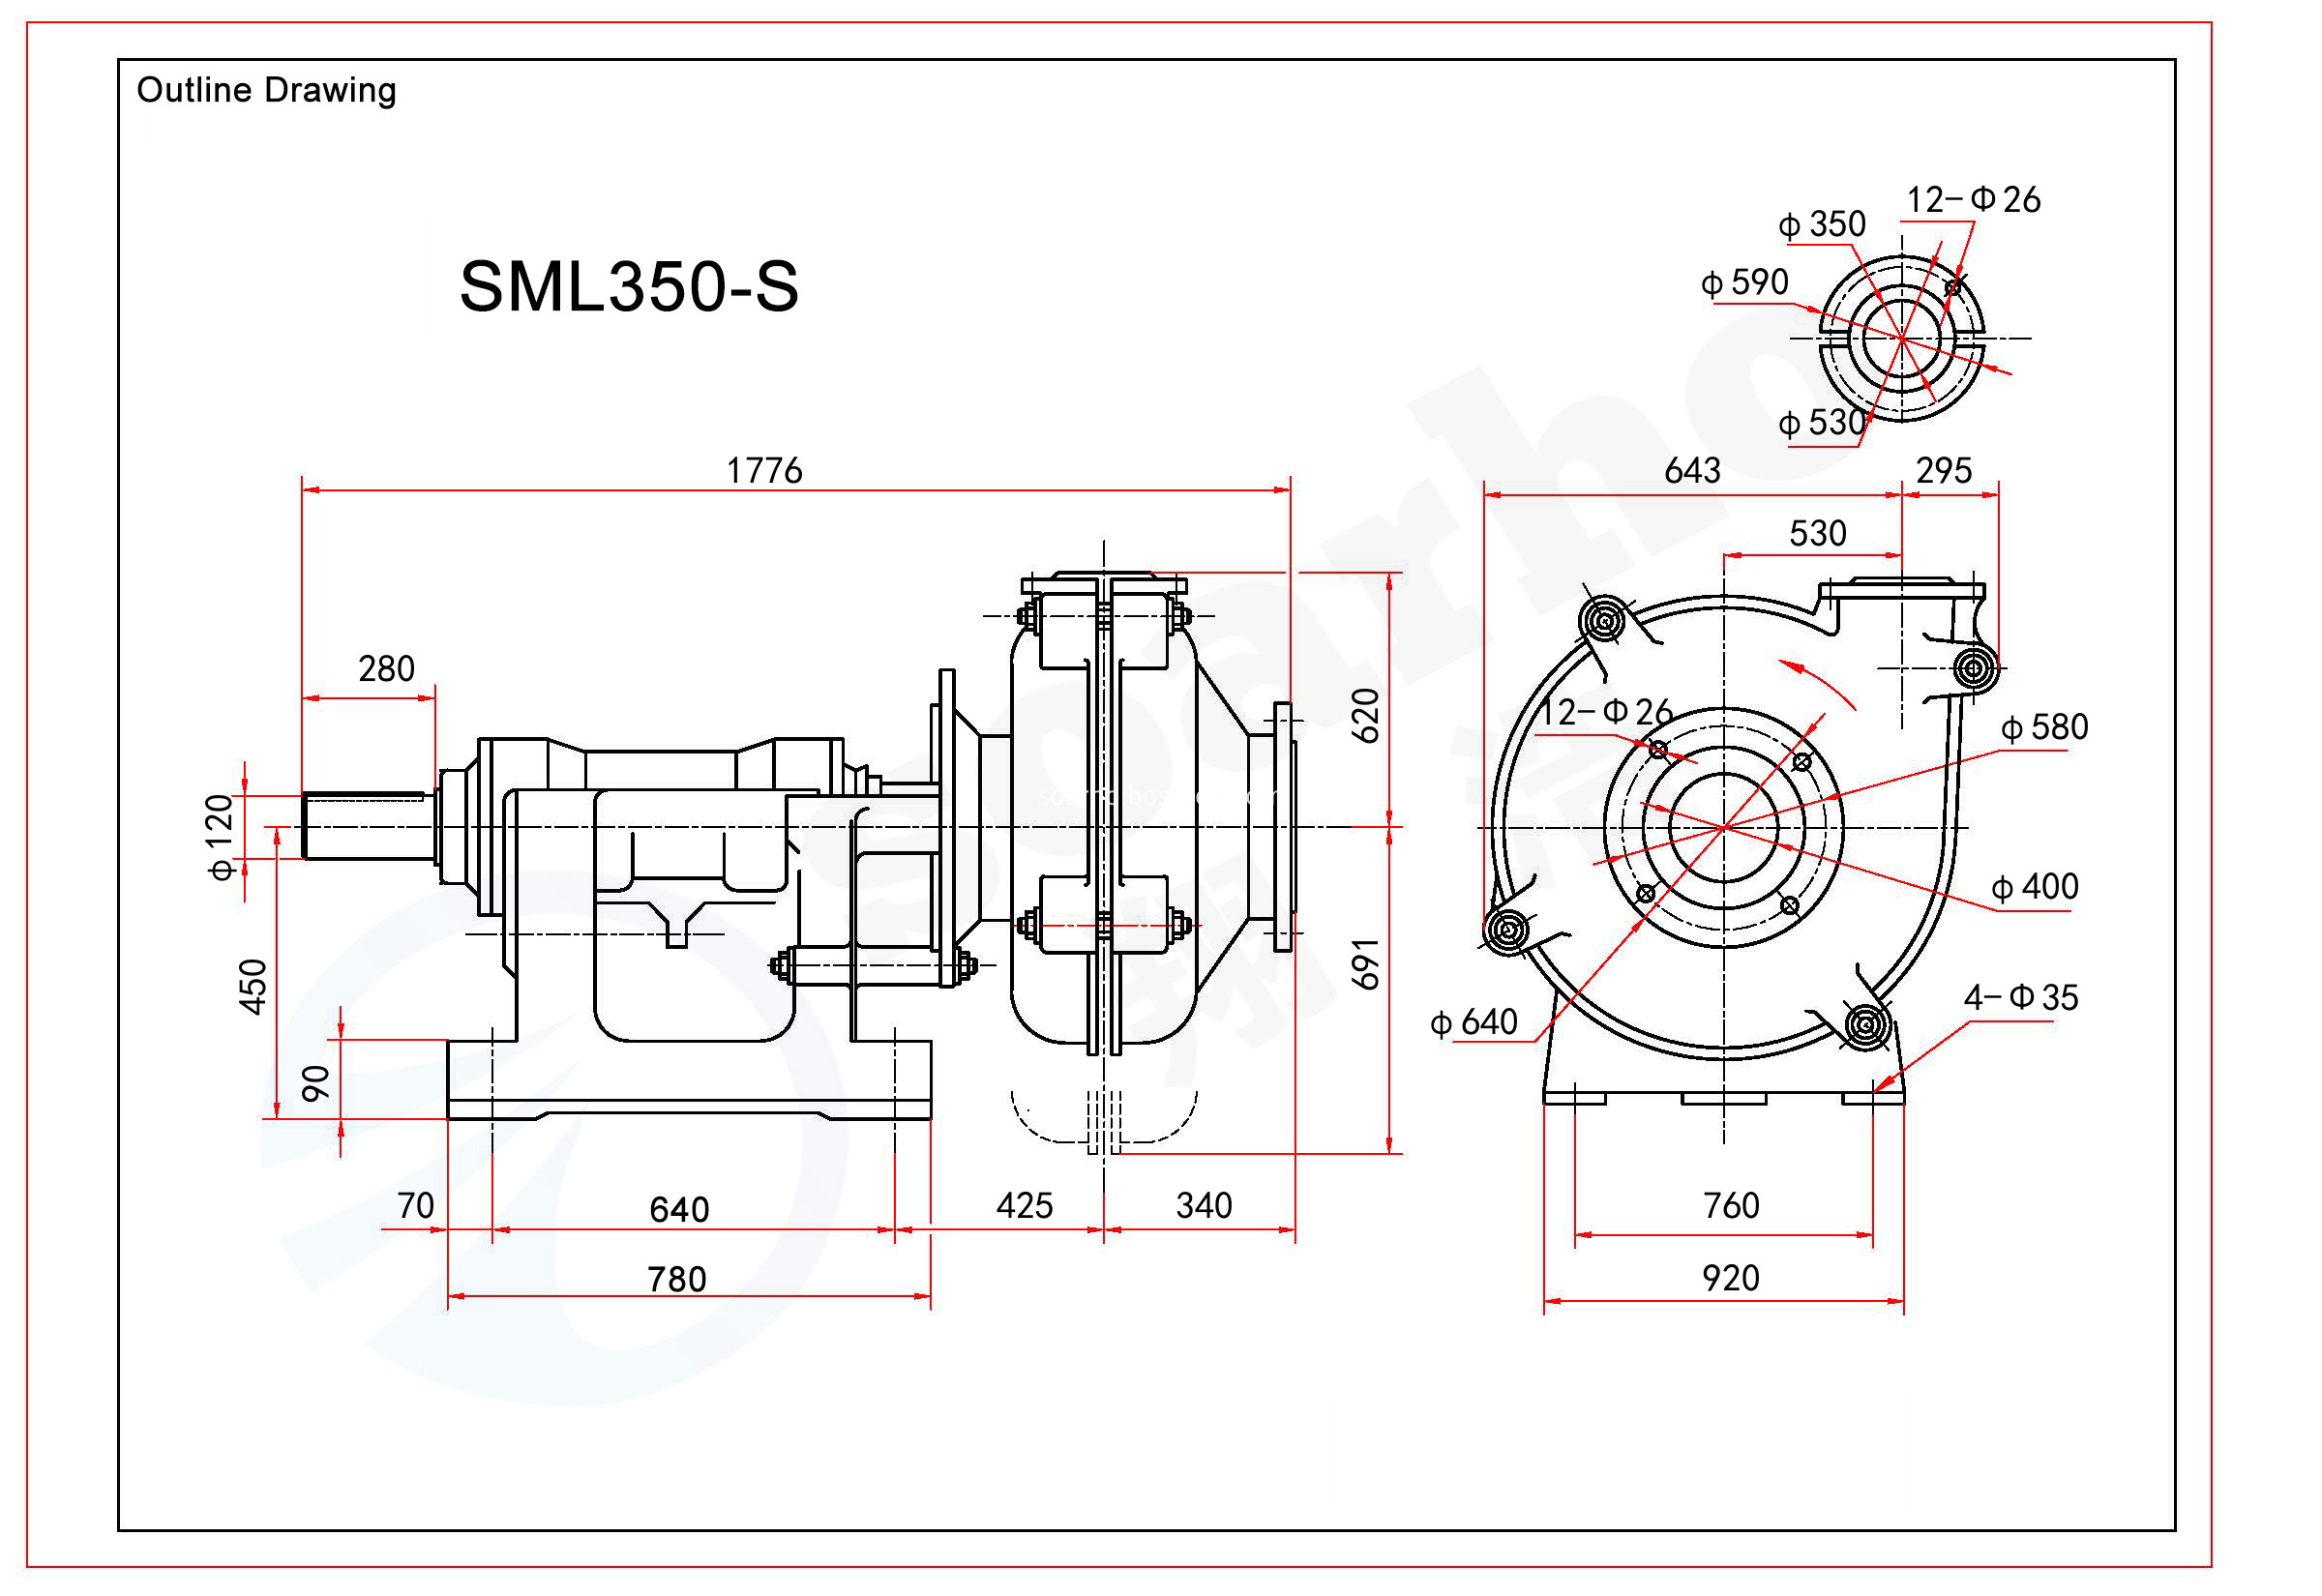 SML350-S outline drawing